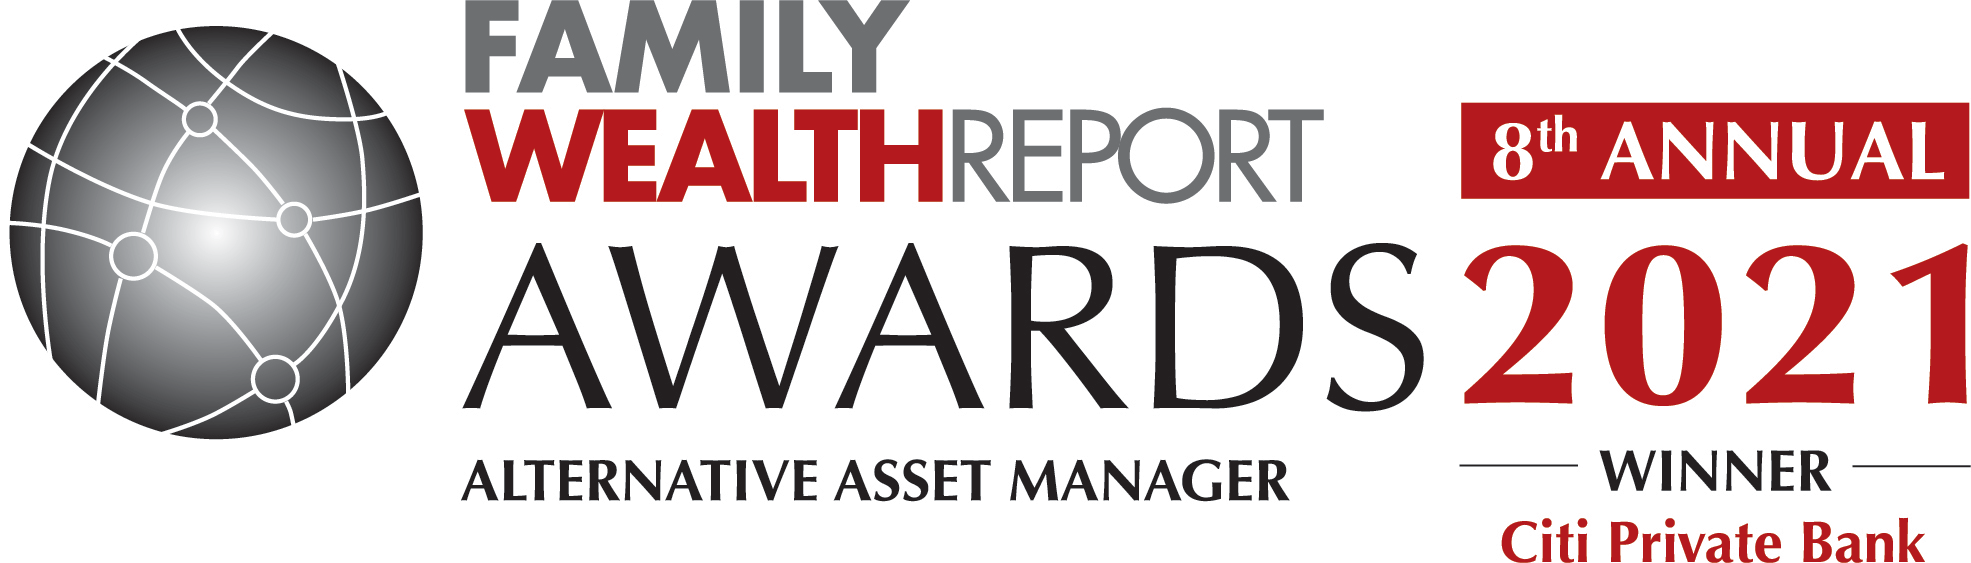 Family-Wealth-Report-Awards-2021